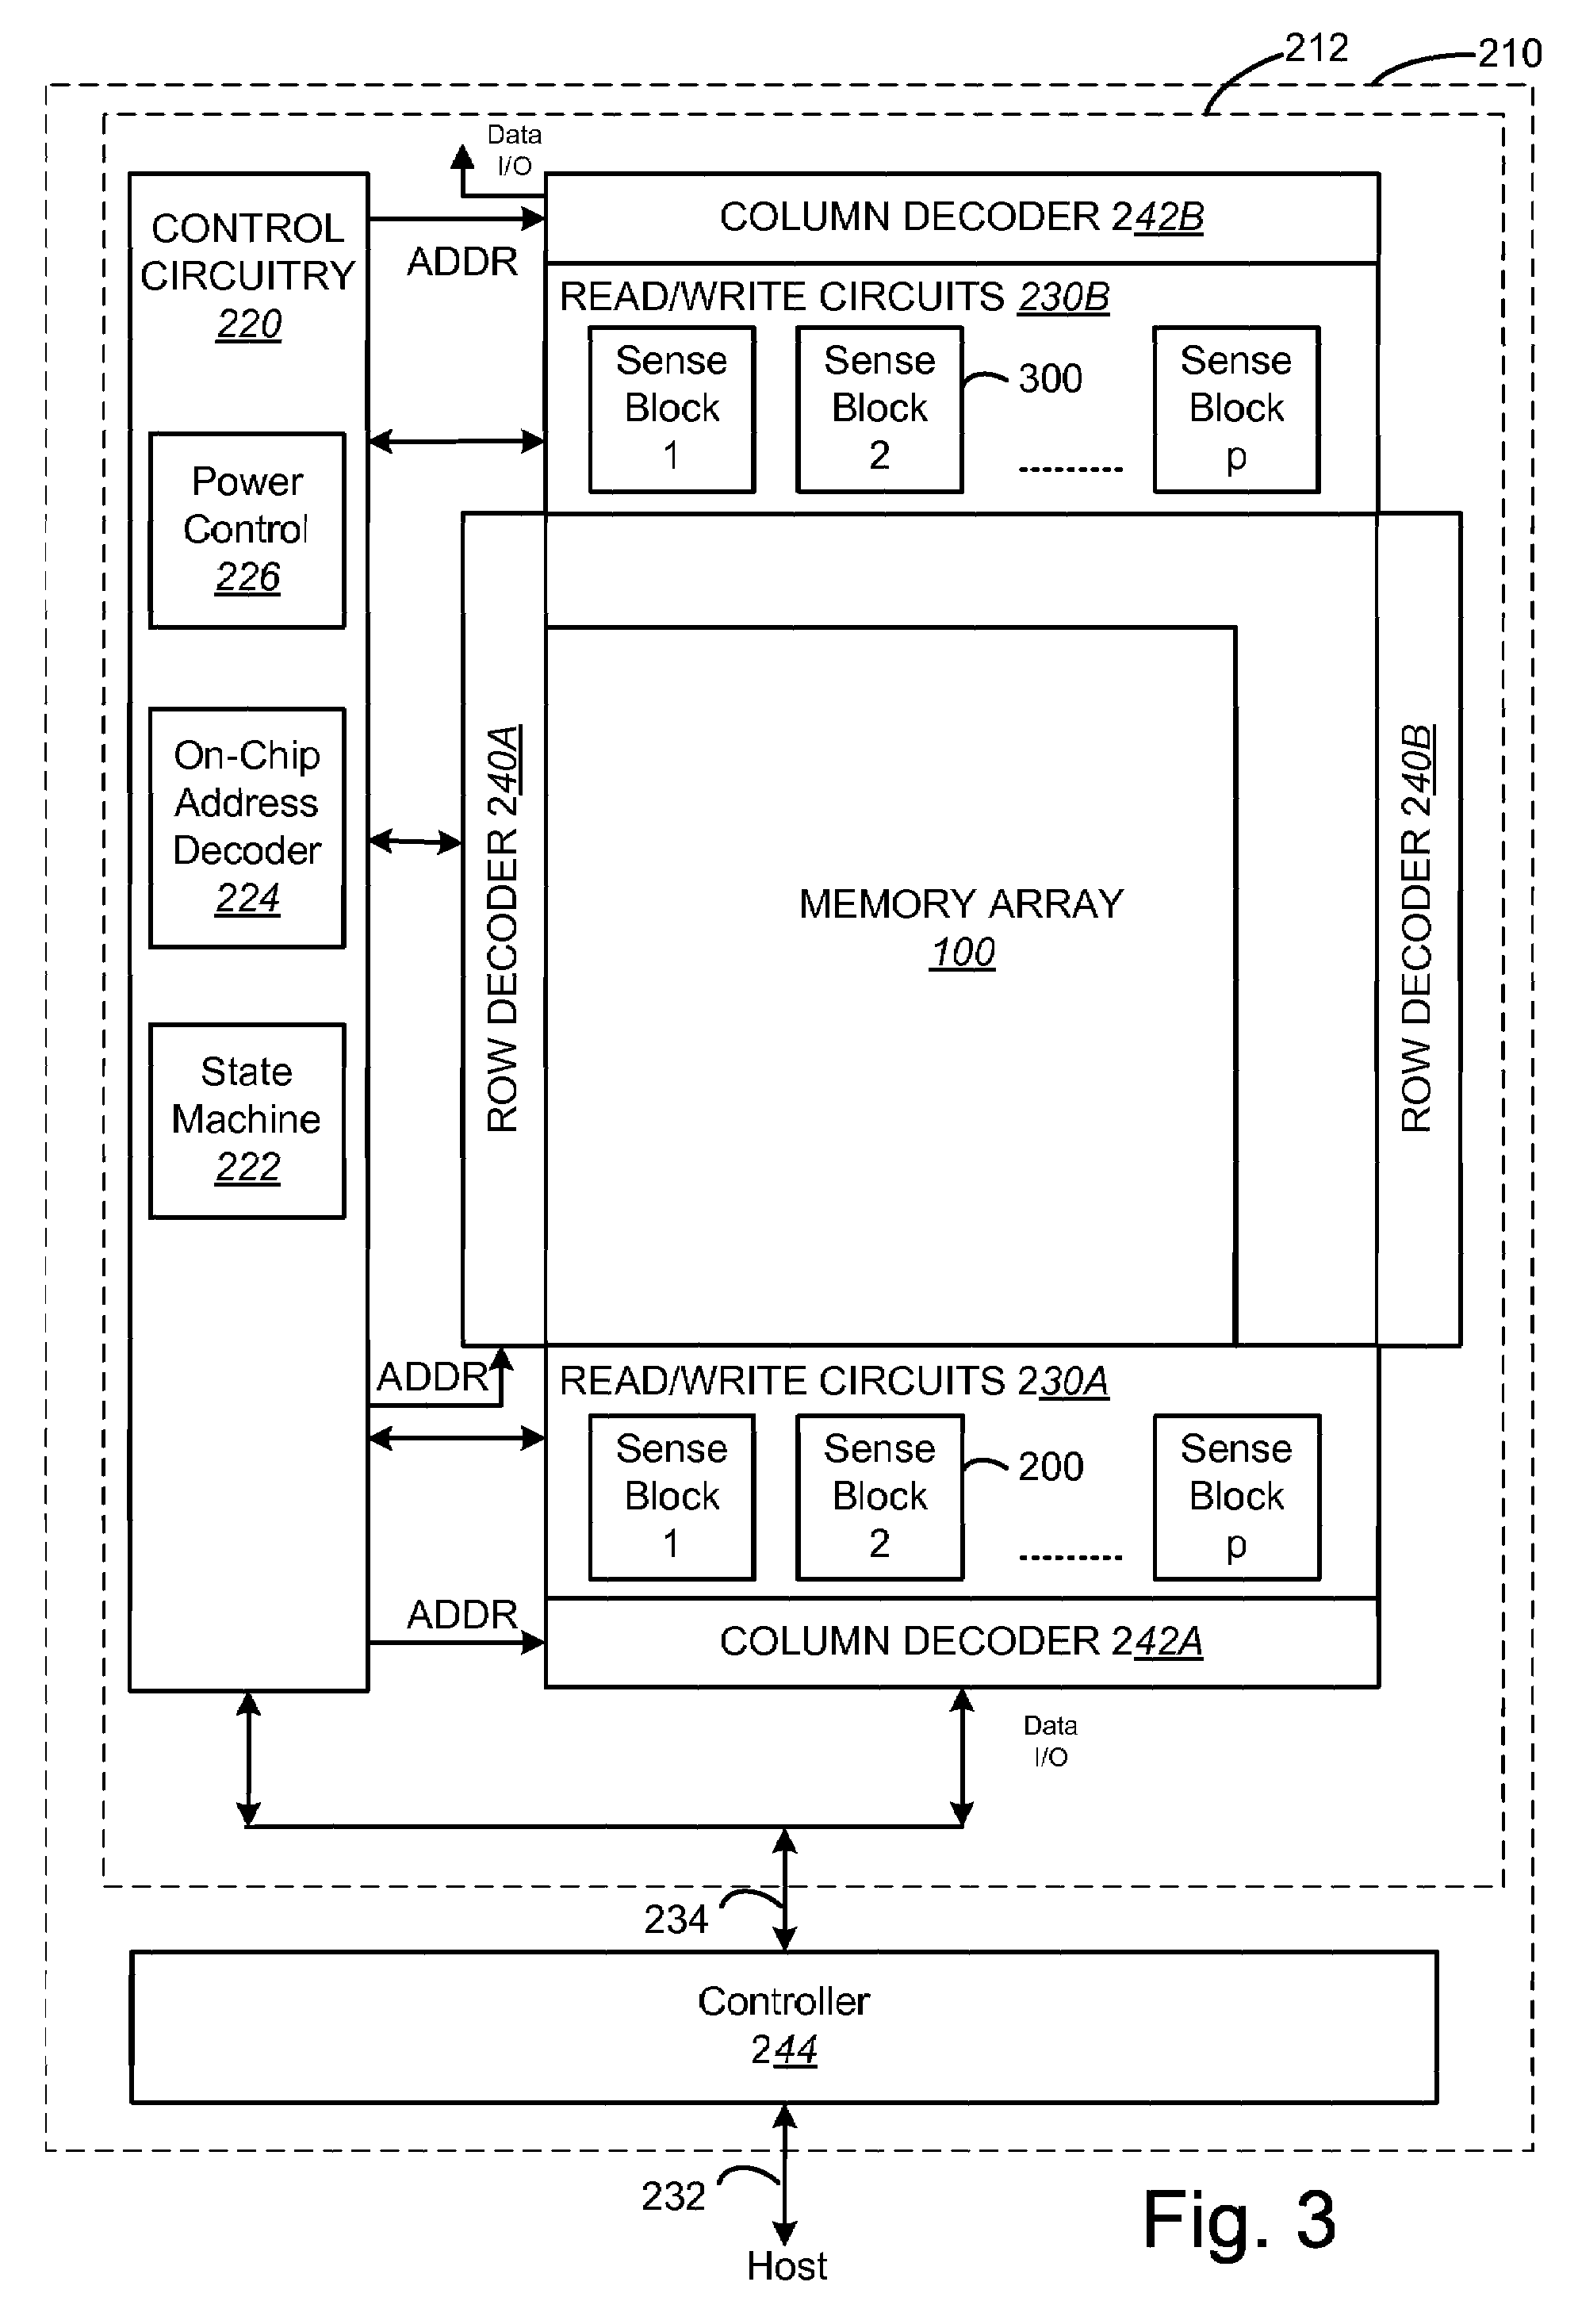 Apparatus with segemented bitscan for verification of programming